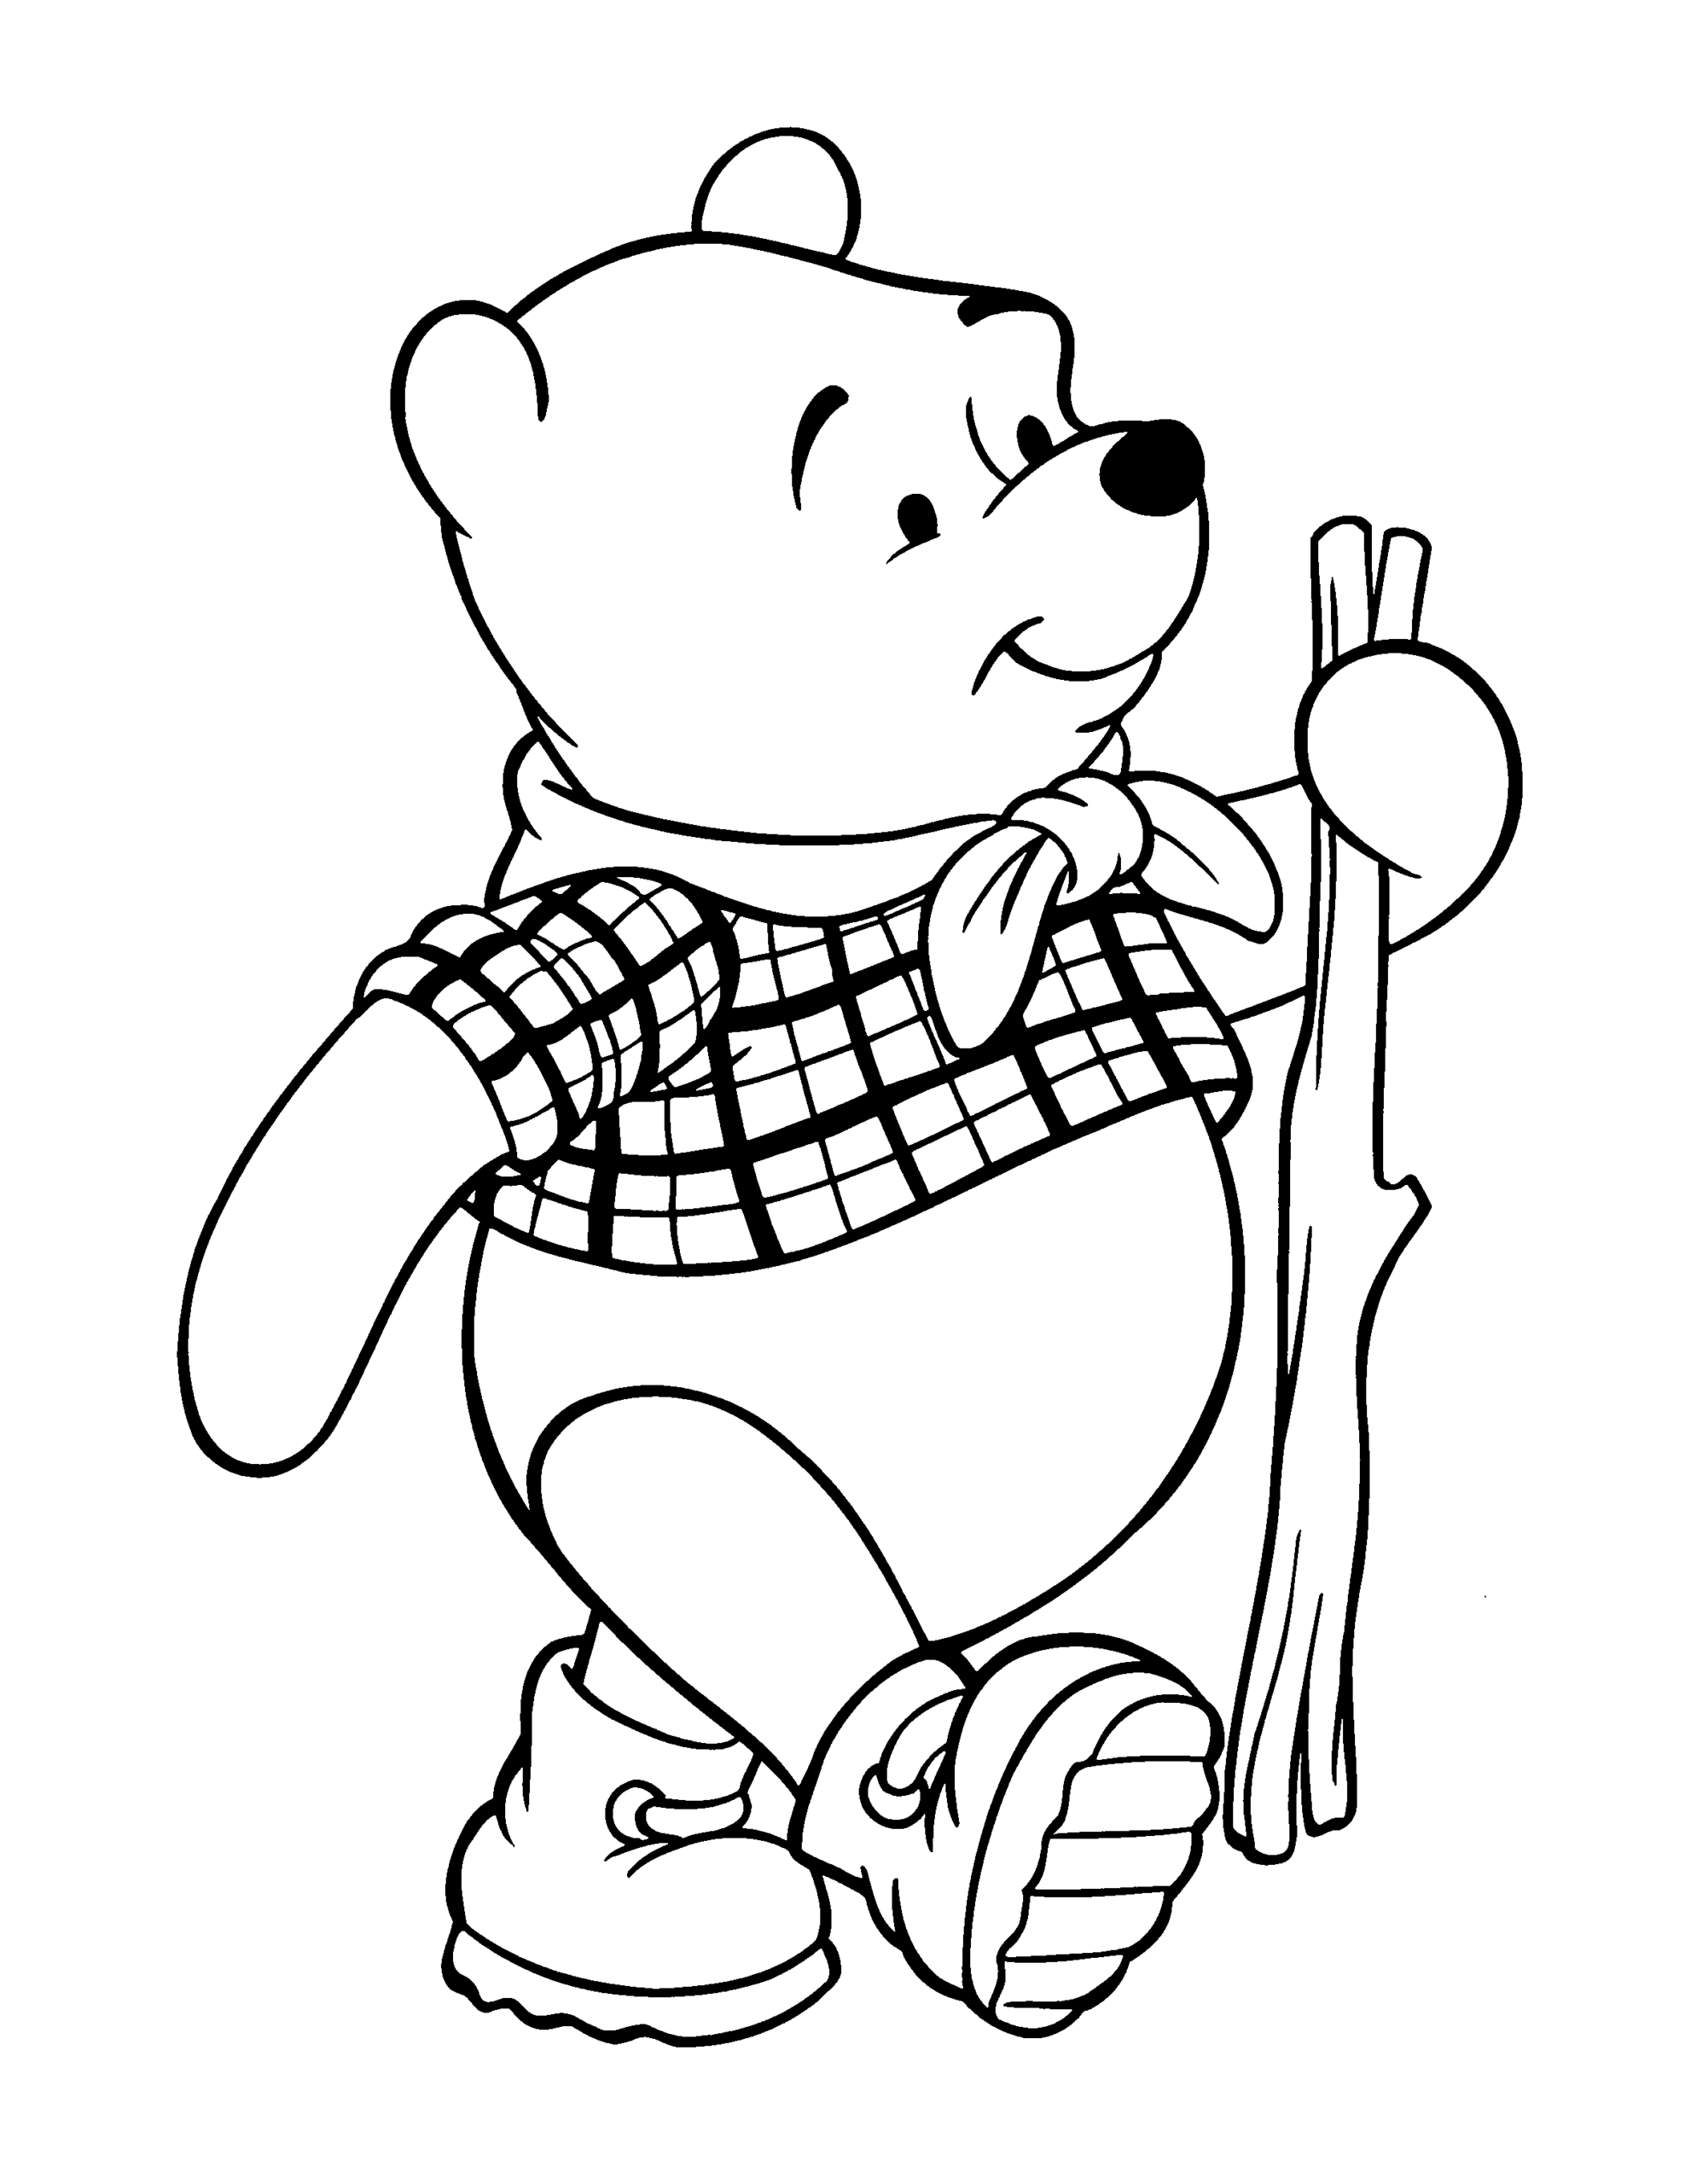 Winnie the Pooh Coloring Pages Cartoons winnie the pooh 109 Printable 2020 7088 Coloring4free